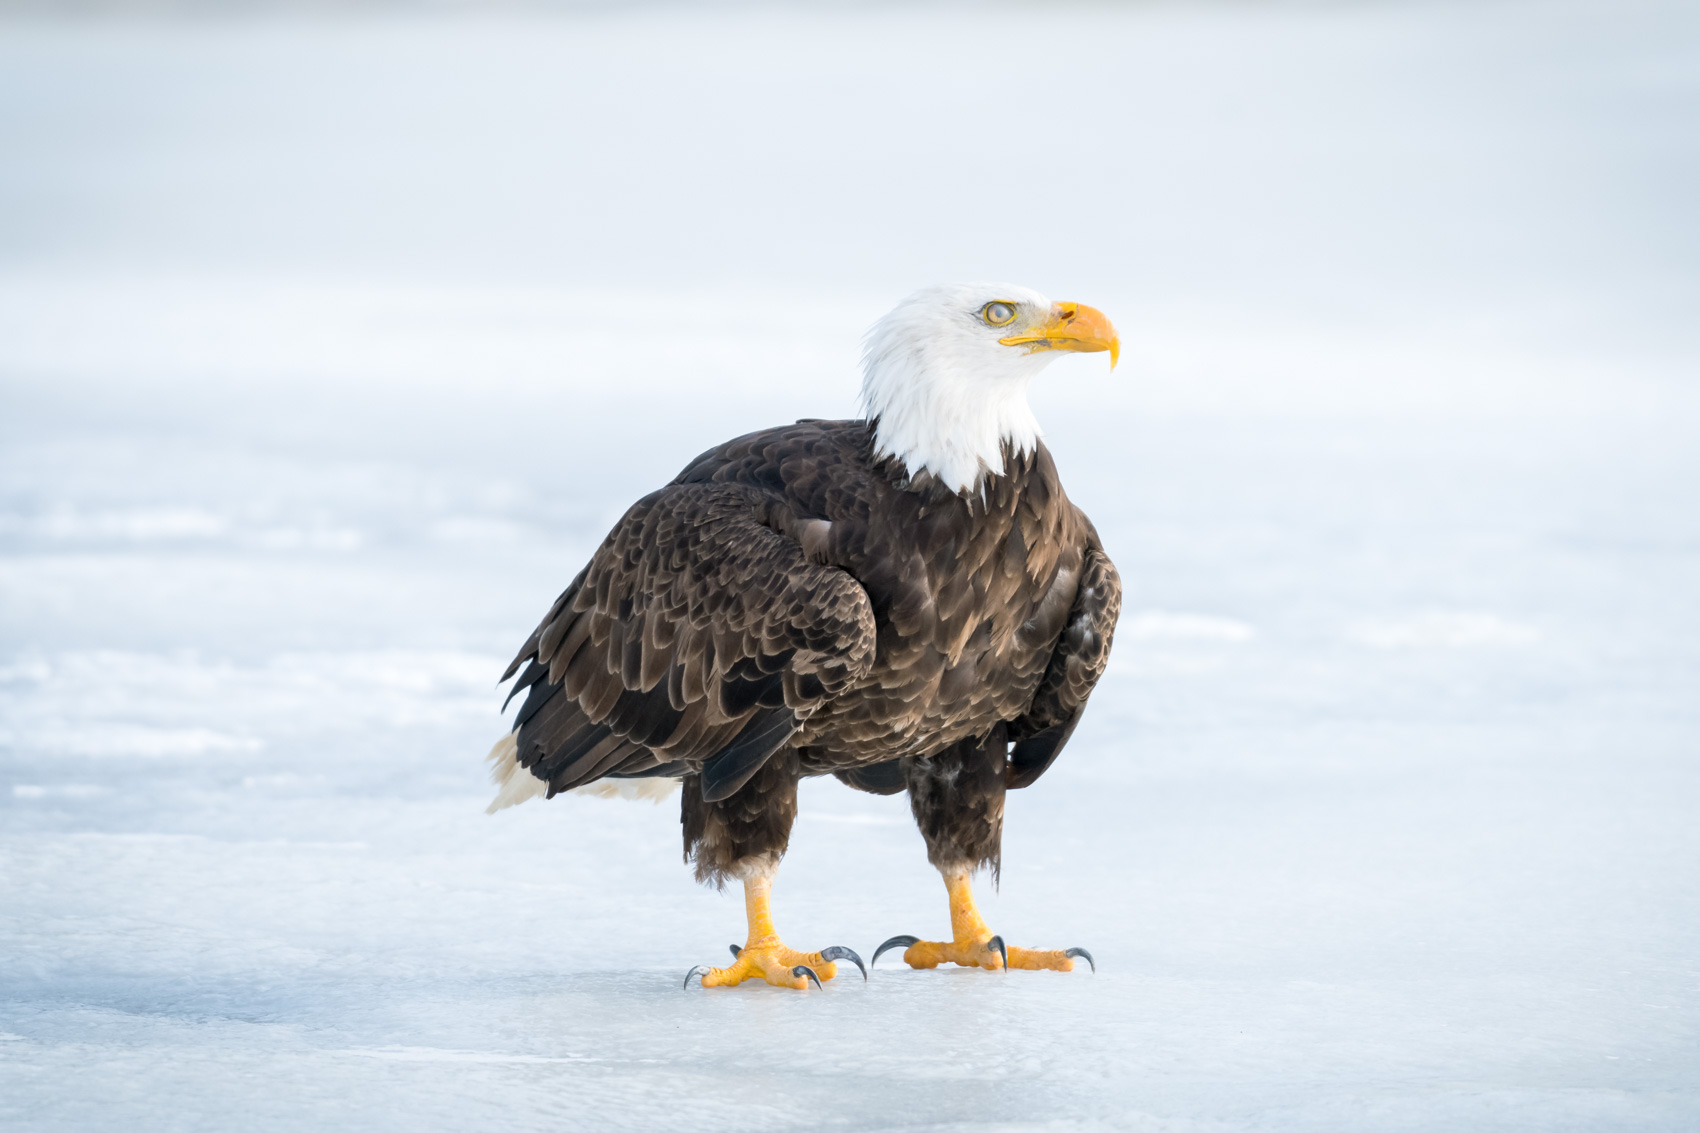 Bald eagle standing on ice © David Coulson Canadian conservation photojournalist